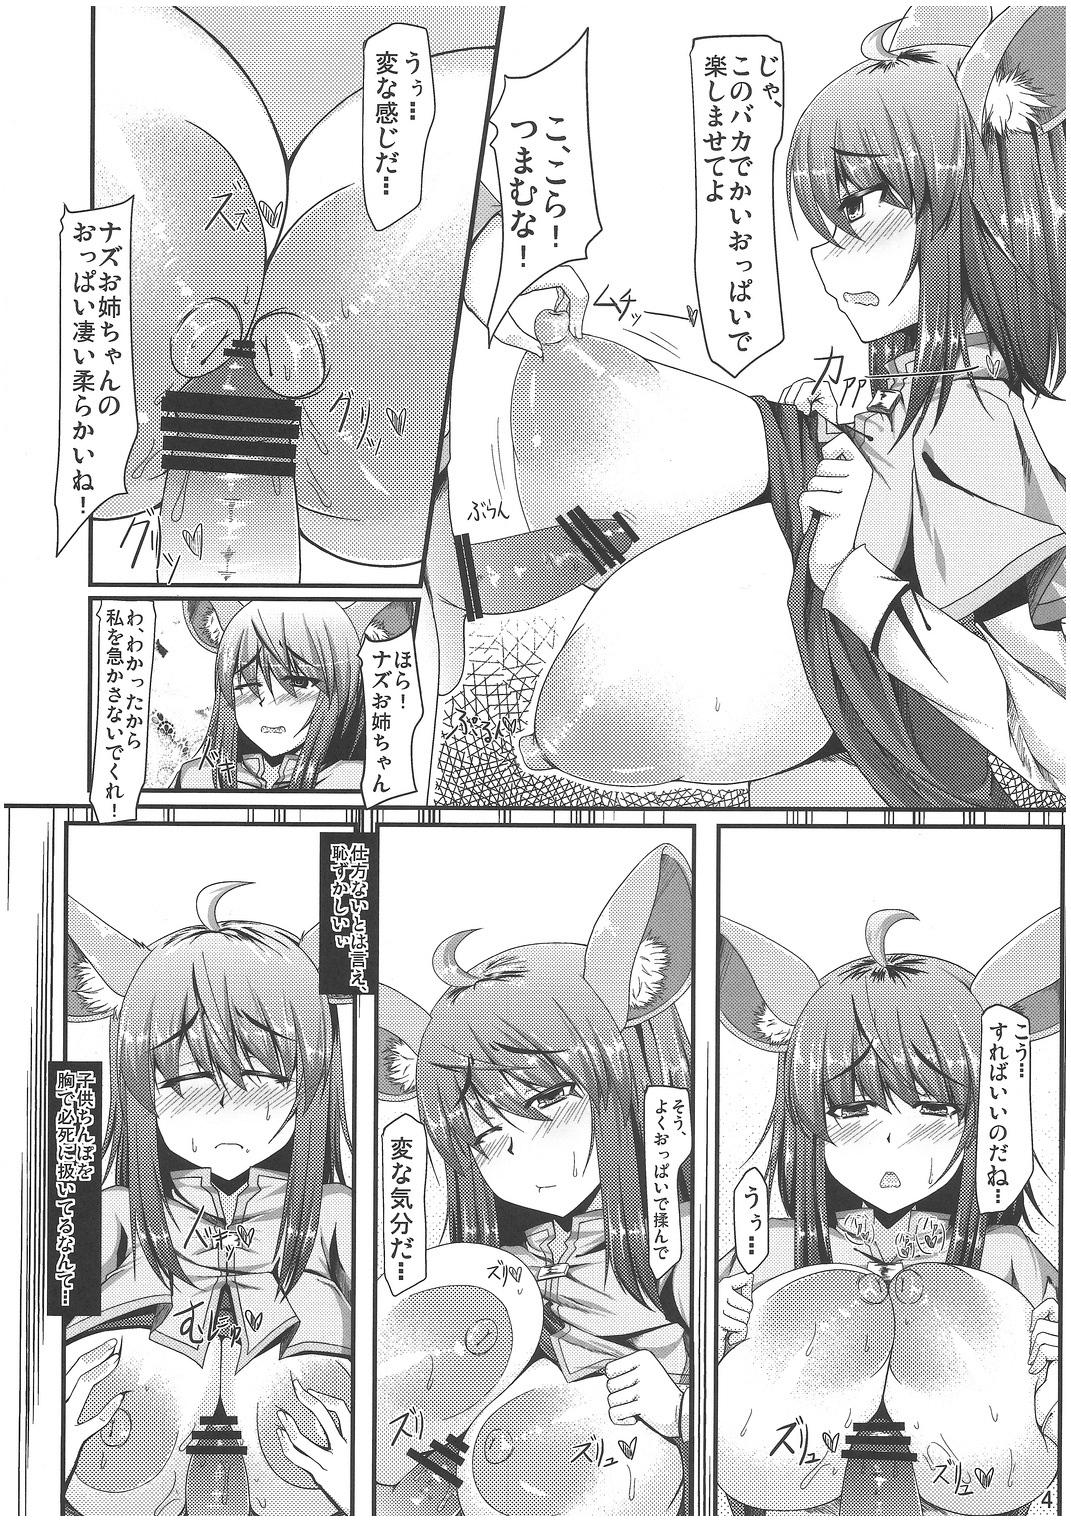 Gay Pornstar Red Alert - Touhou project Transvestite - Page 3